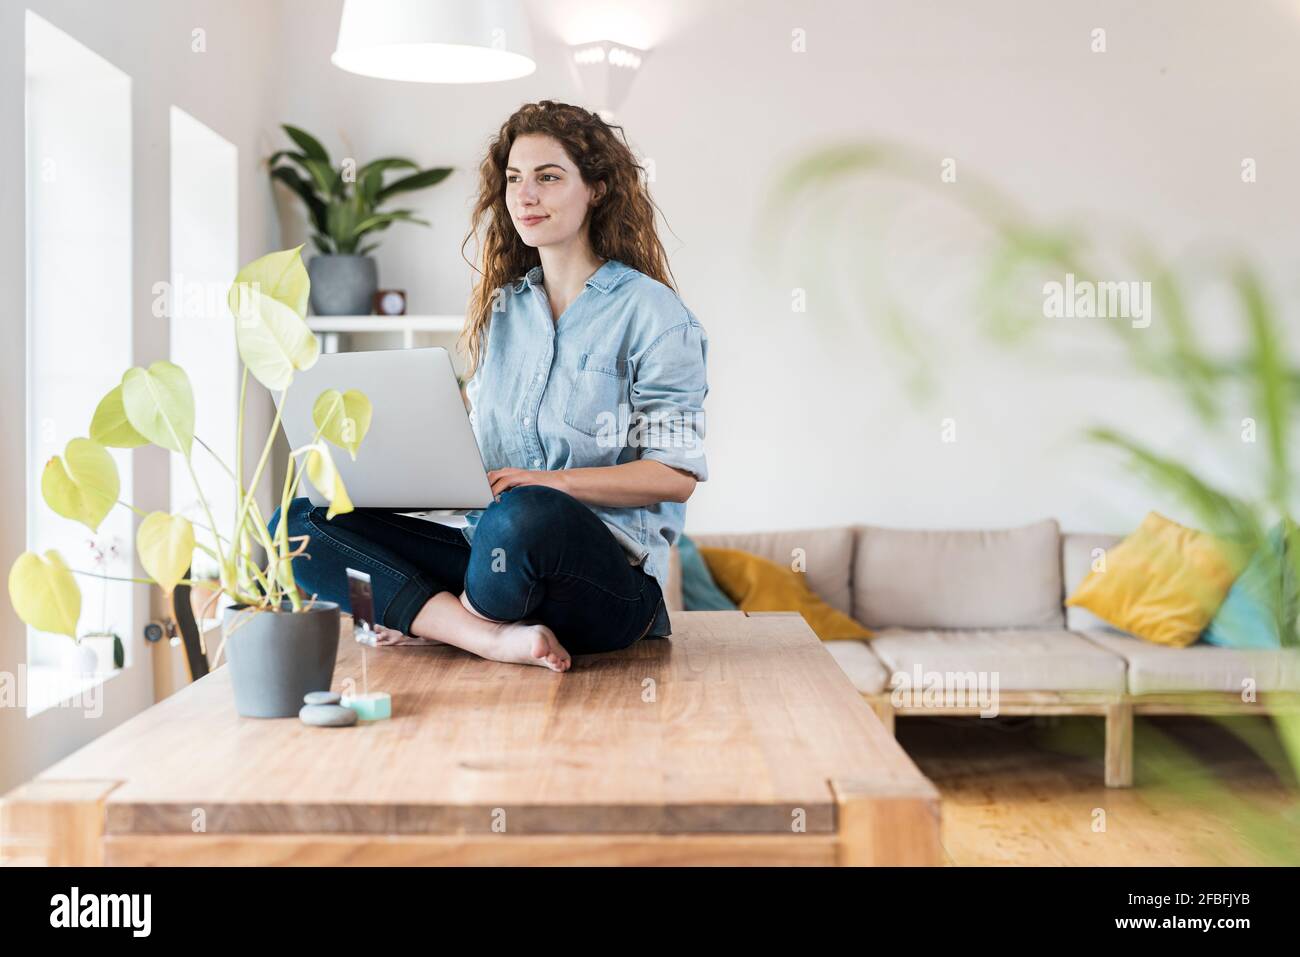 Contented woman with laptop day dreaming while sitting on table at home Stock Photo